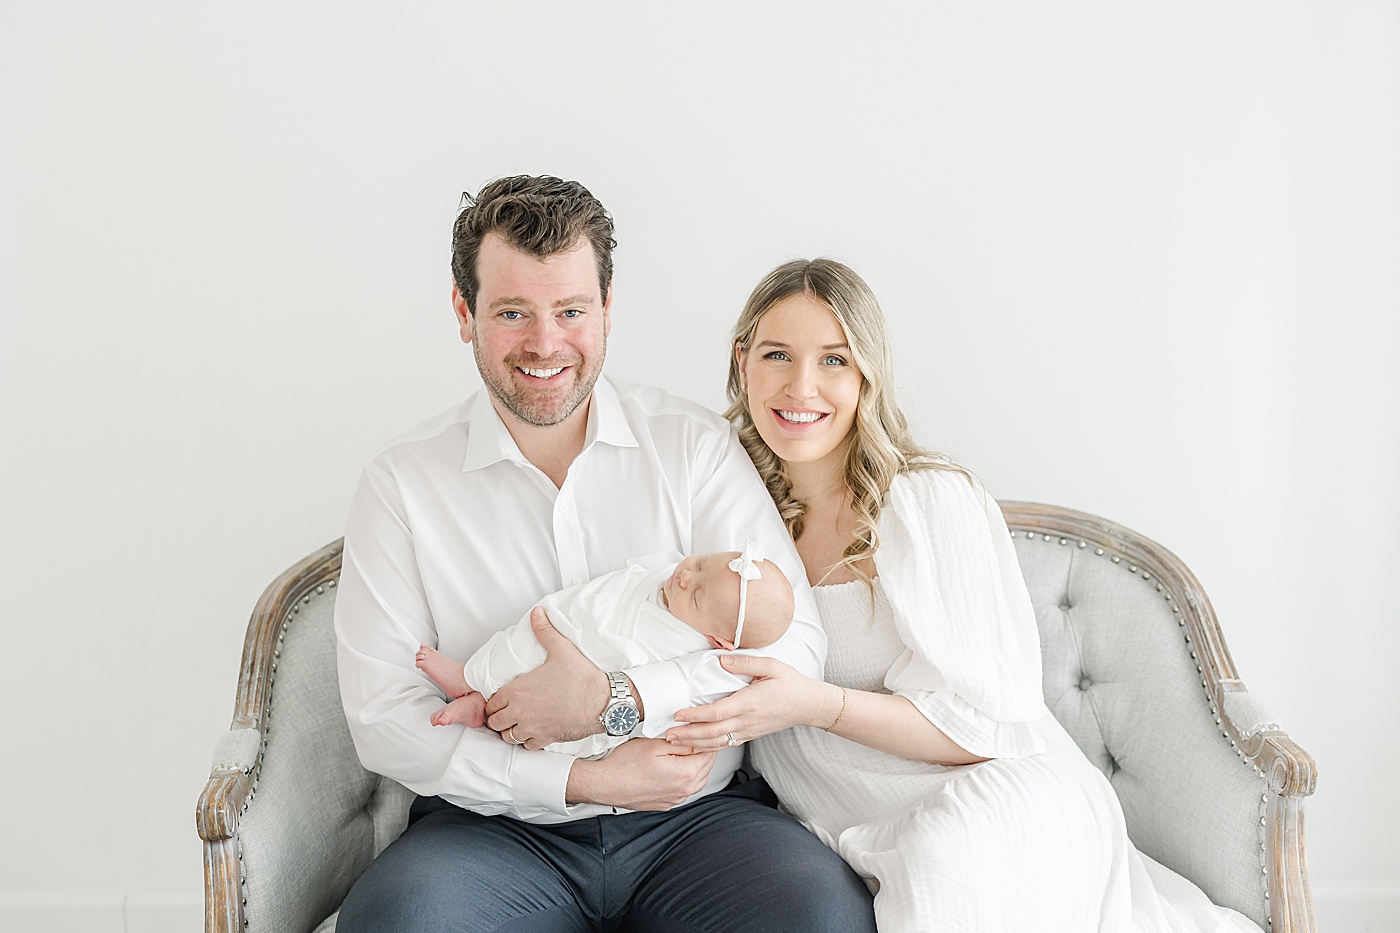 Studio newborn session for first-time parents with baby girl | Kristin Wood Photography